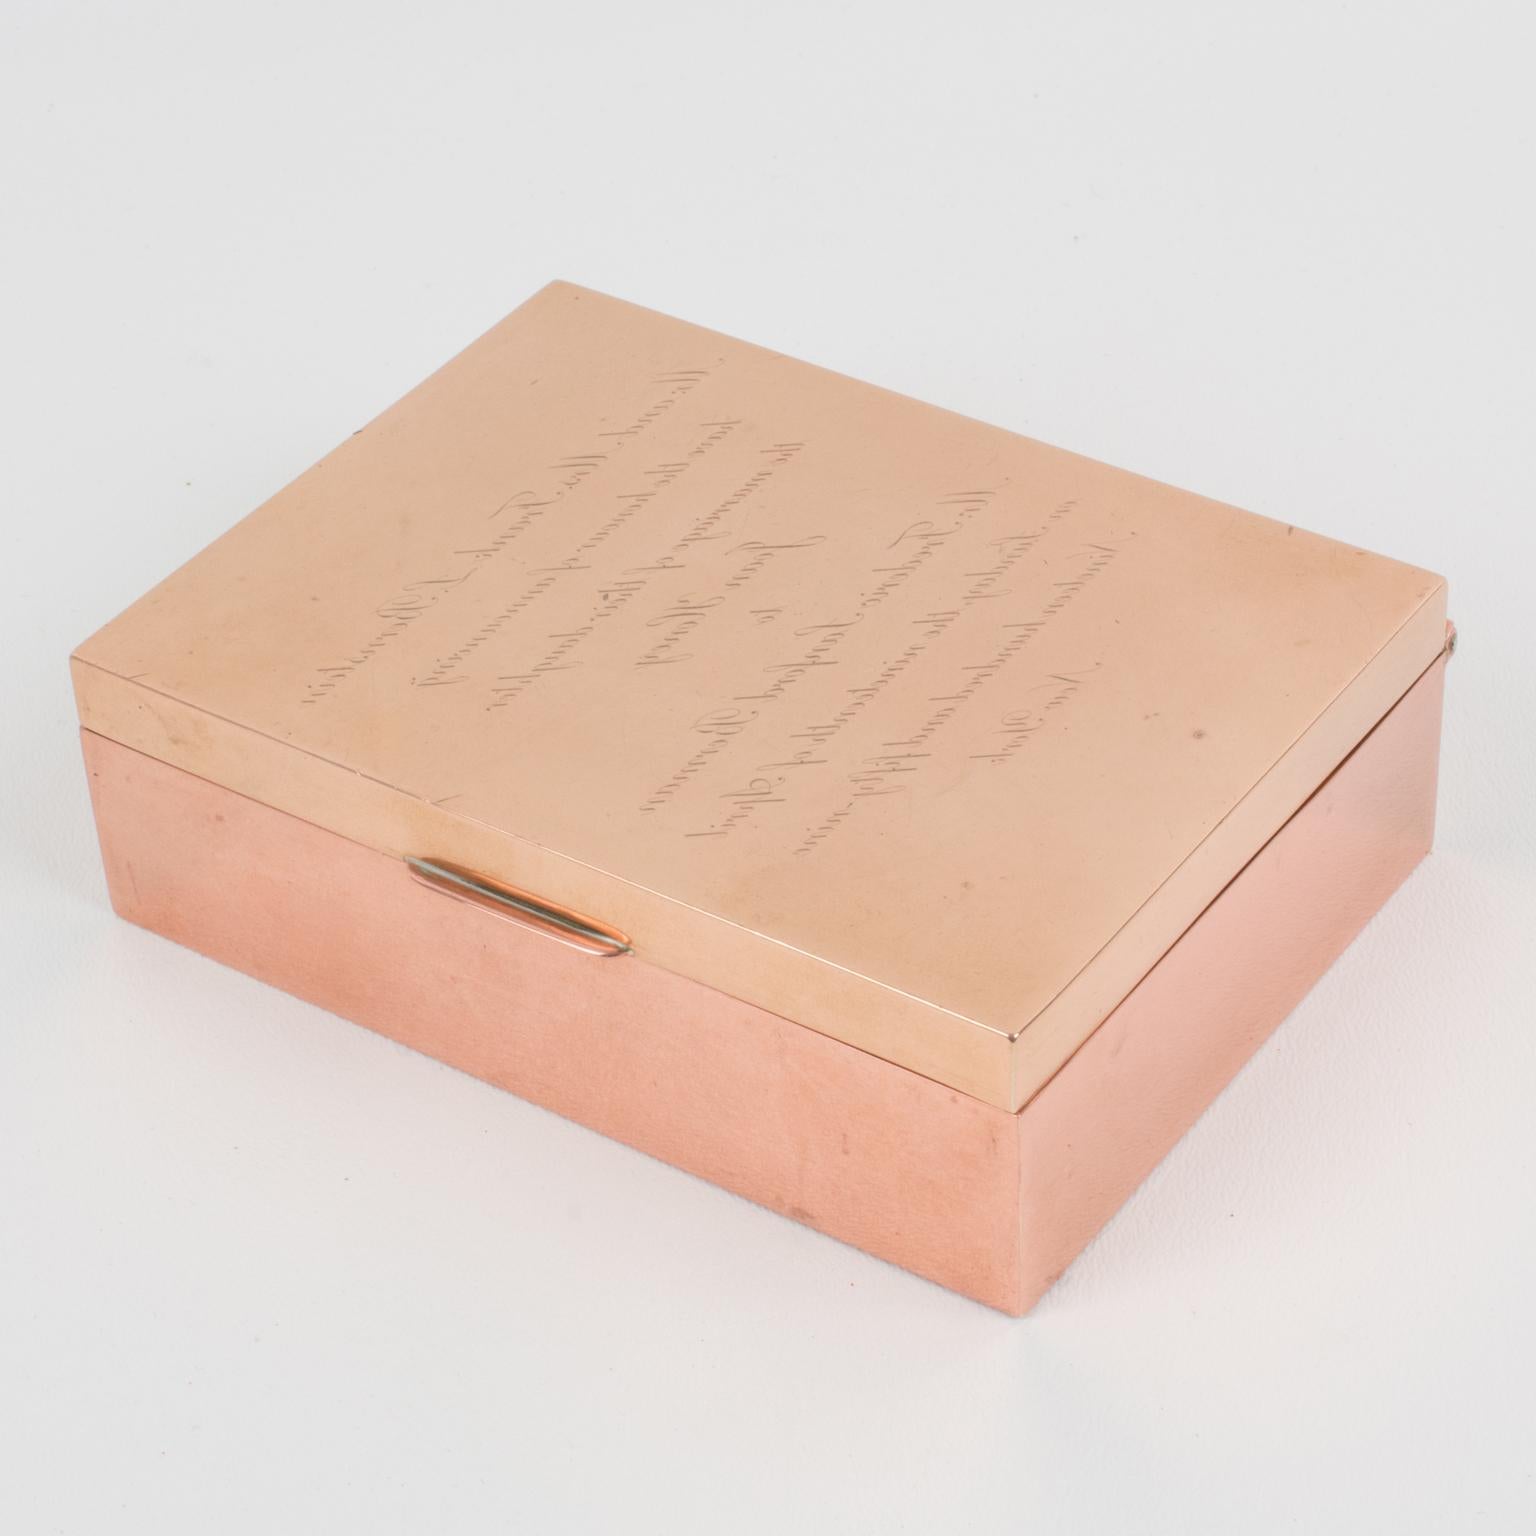 Cartier Paris crafted this sophisticated copper and brass decorative box in the 1950s. It is a puzzle box that uses Leonardo da Vinci's specular writing technique*. If you look at the box the straight way, the text engraved on the top is